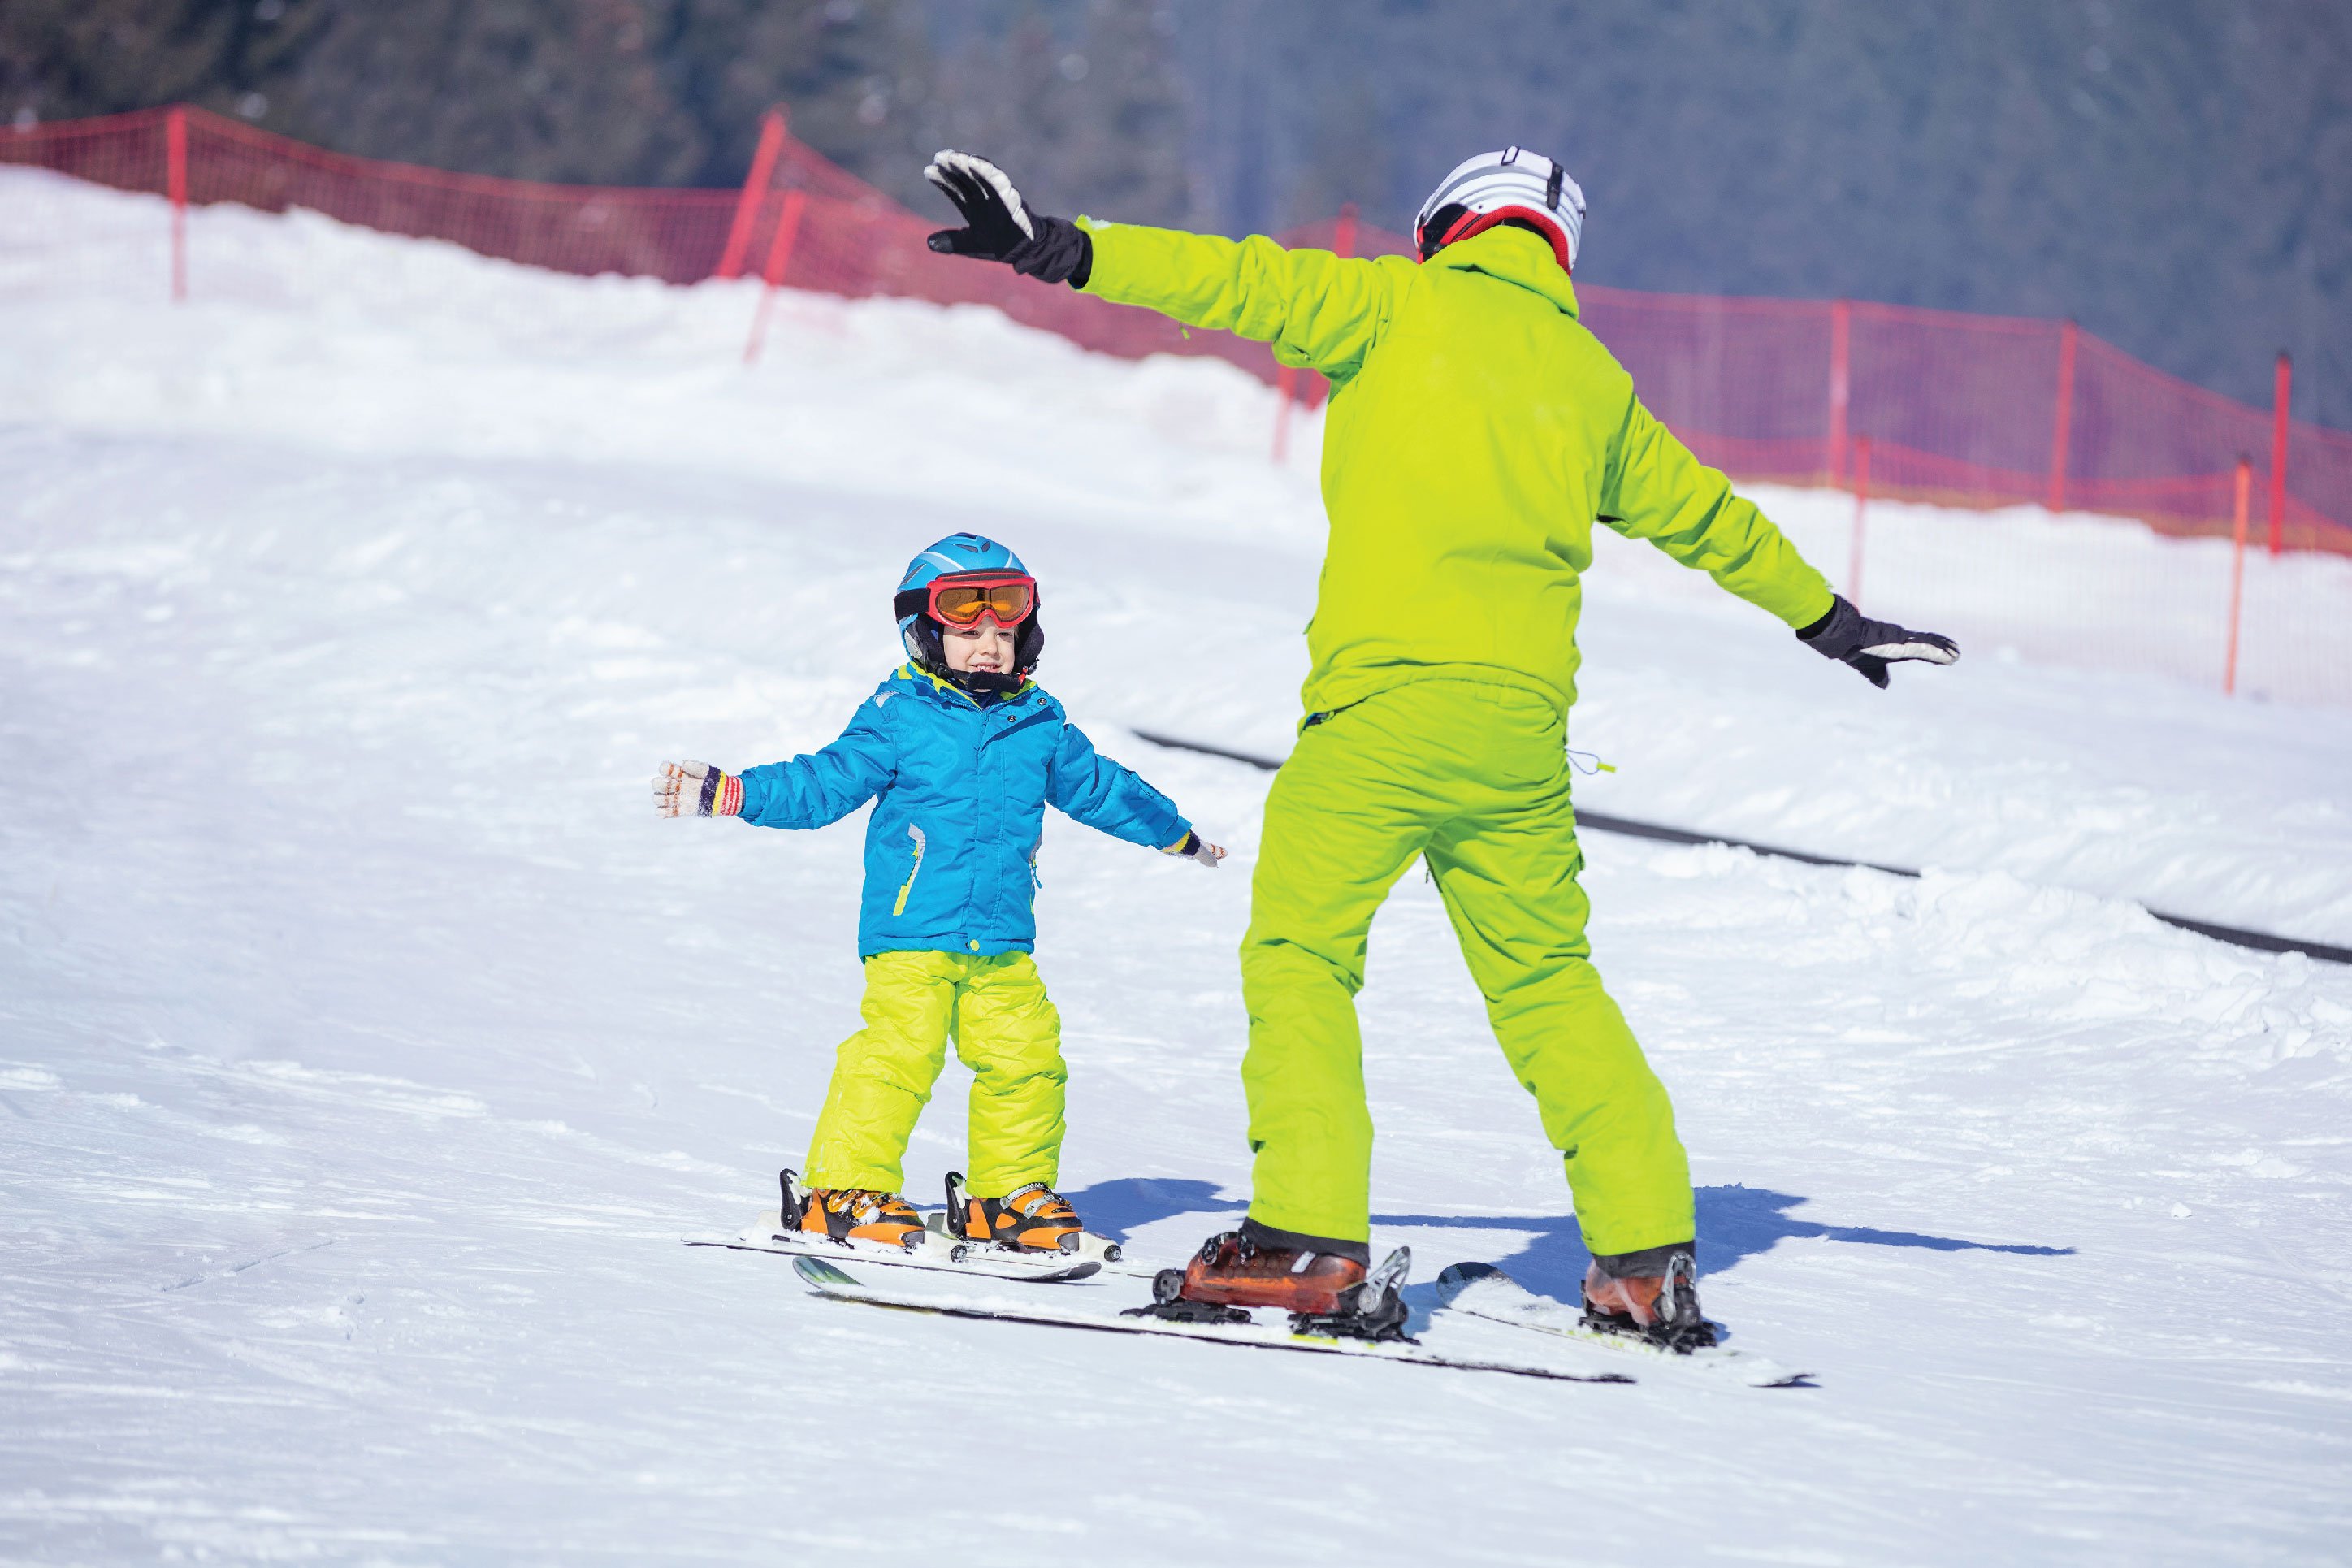 father teaching his son to snowboard